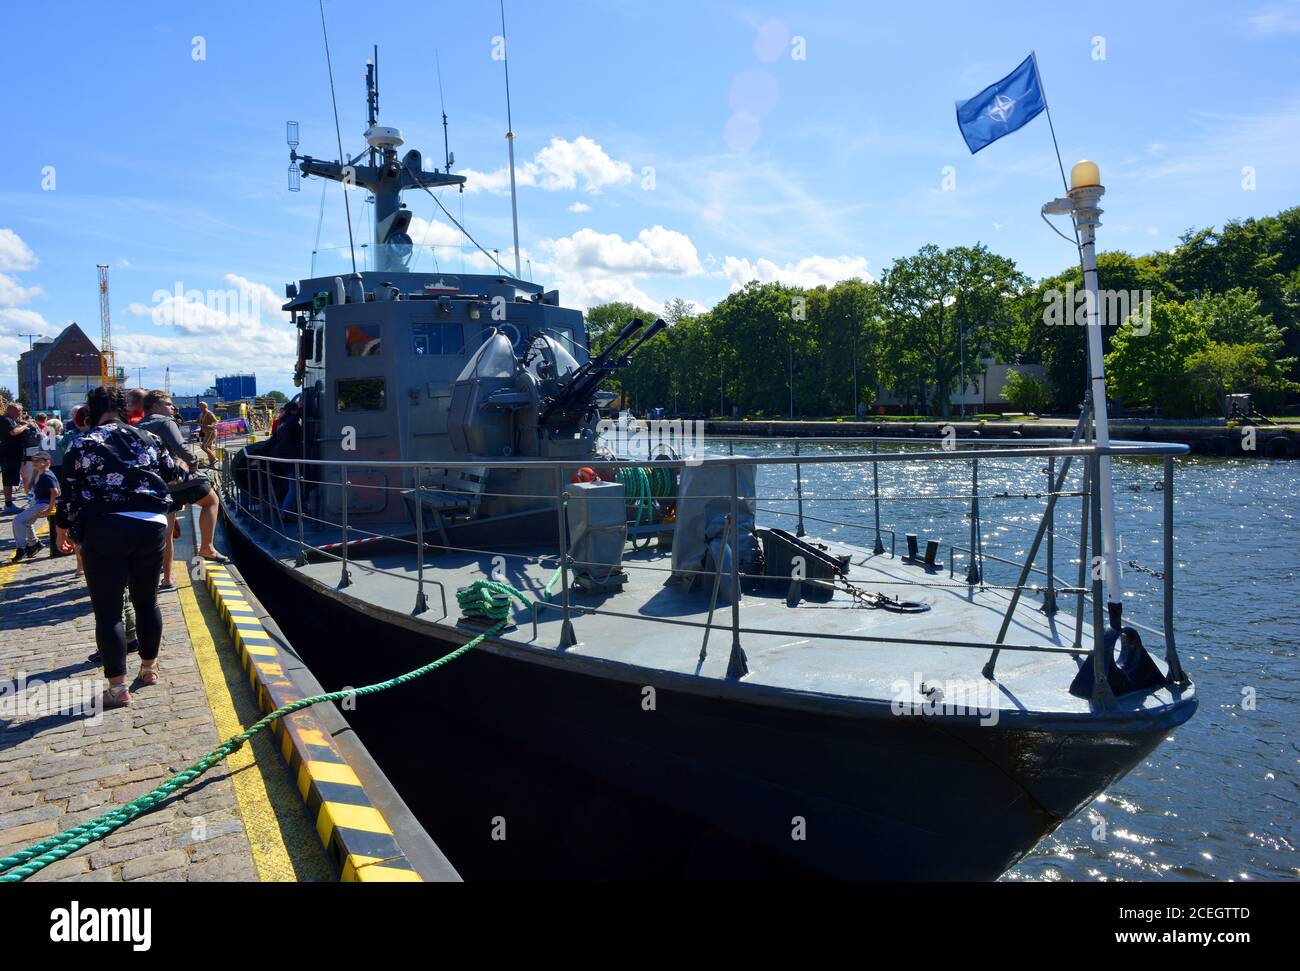 Kolobrzeg, Poland, a torpedo boat in the harbor with tourists and visitors Stock Photo